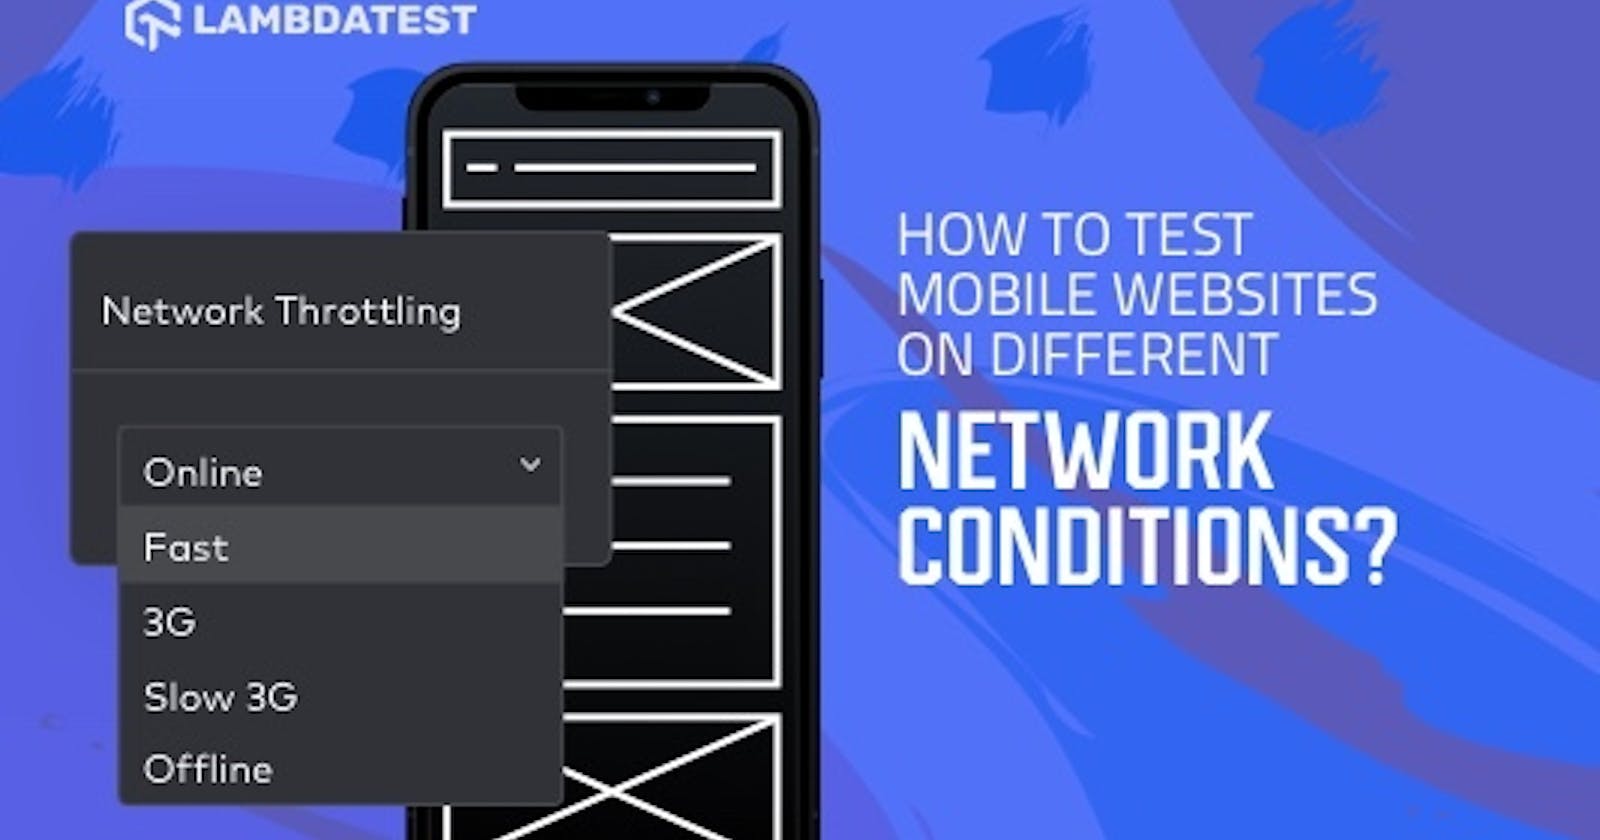 How To Test Mobile Websites On Different Network Conditions?